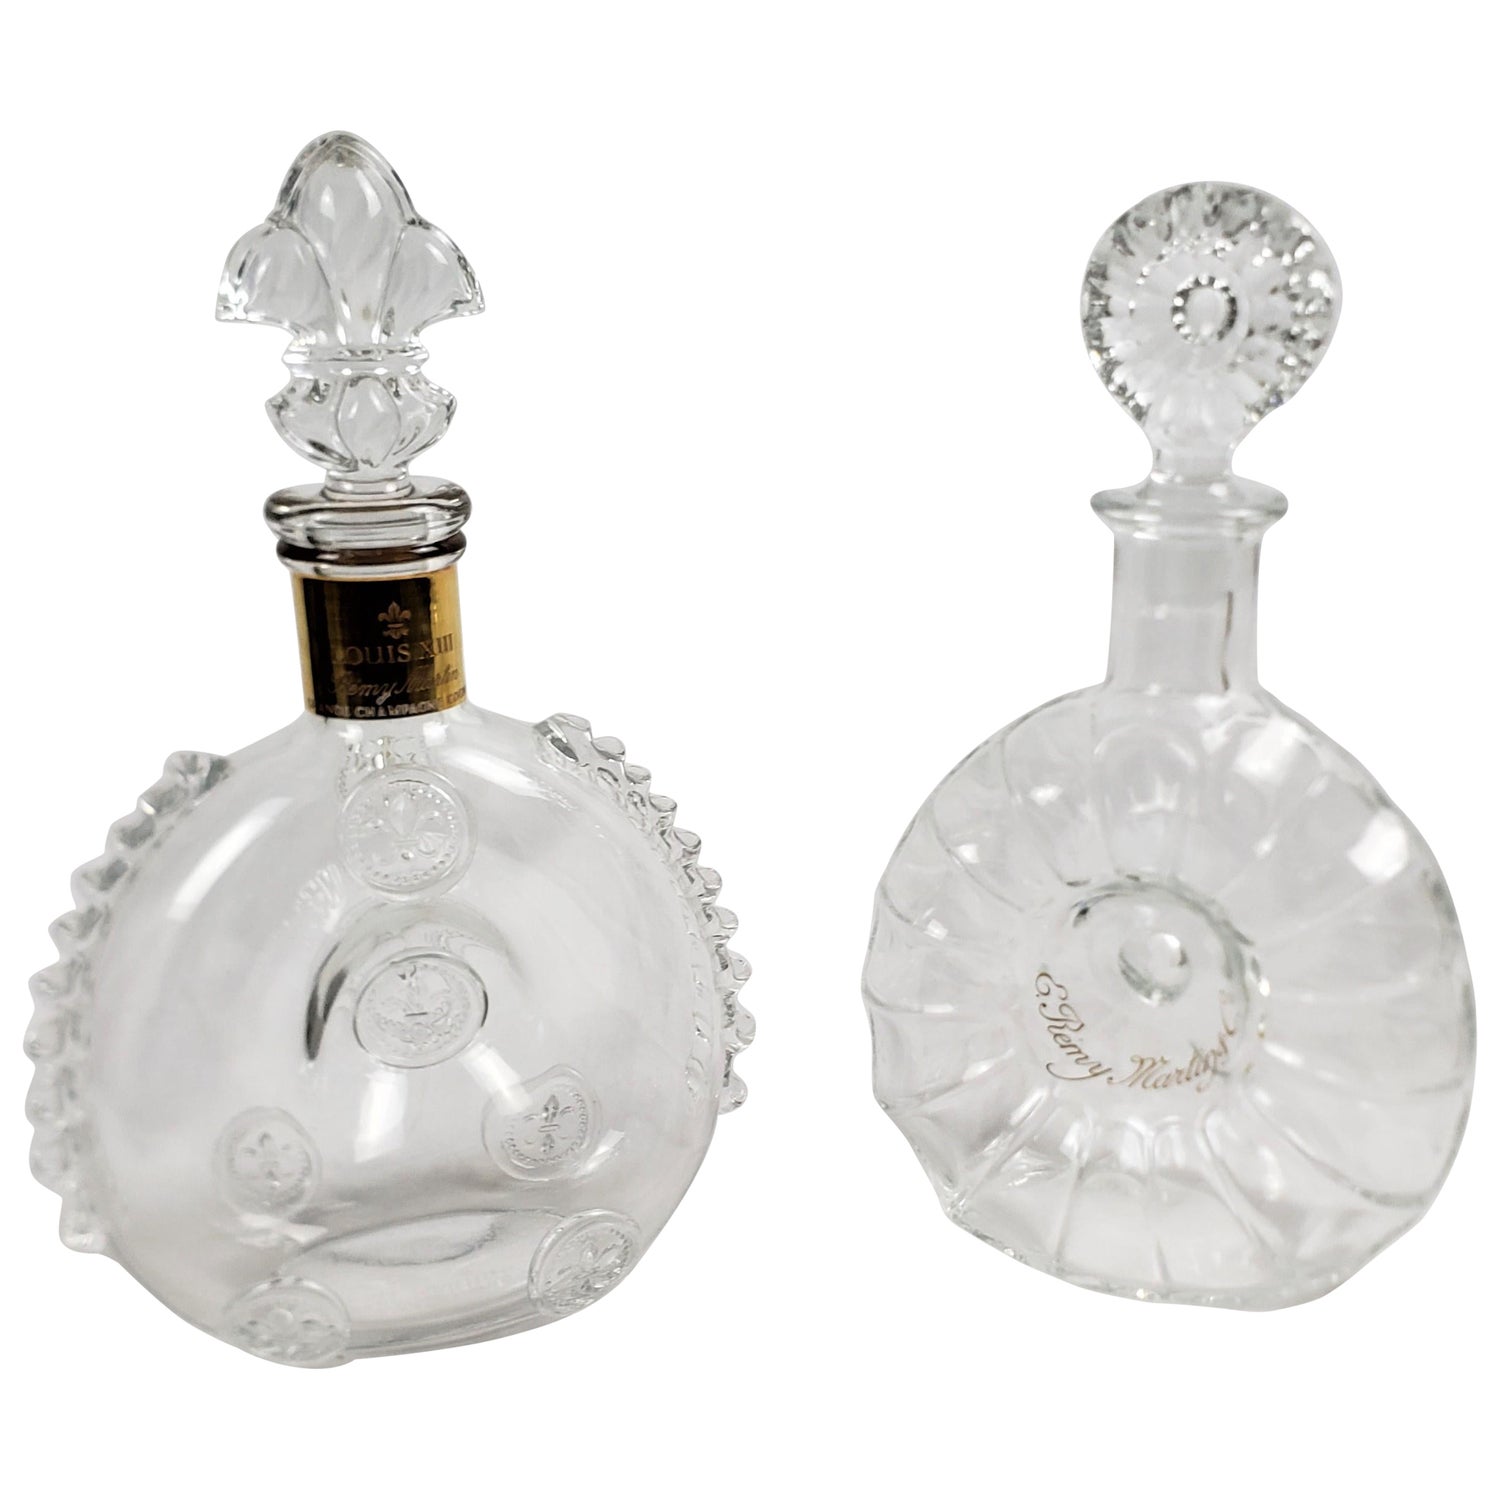 Lot - Baccarat French crystal Remy Martin Louis XIII cognac decanter bottle.  11H x 6 1/2Diam.